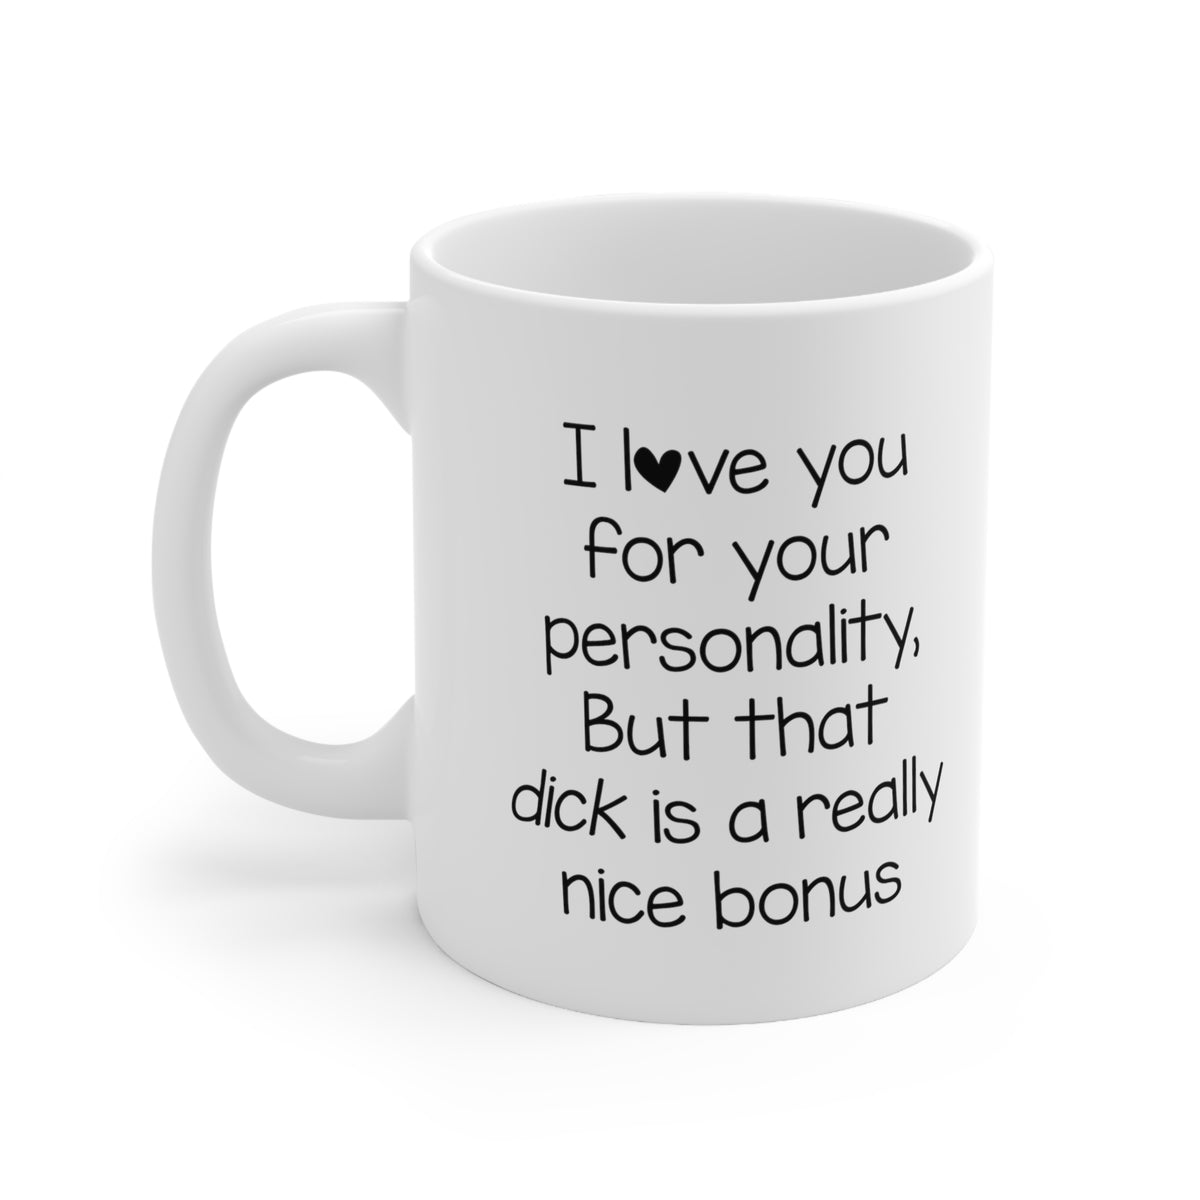 Valentine’s Day Coffee Mug - I love you for your personality, But that d*k is a really nice bonus - Funny Love Mug For Boyfriend From Girlfriend